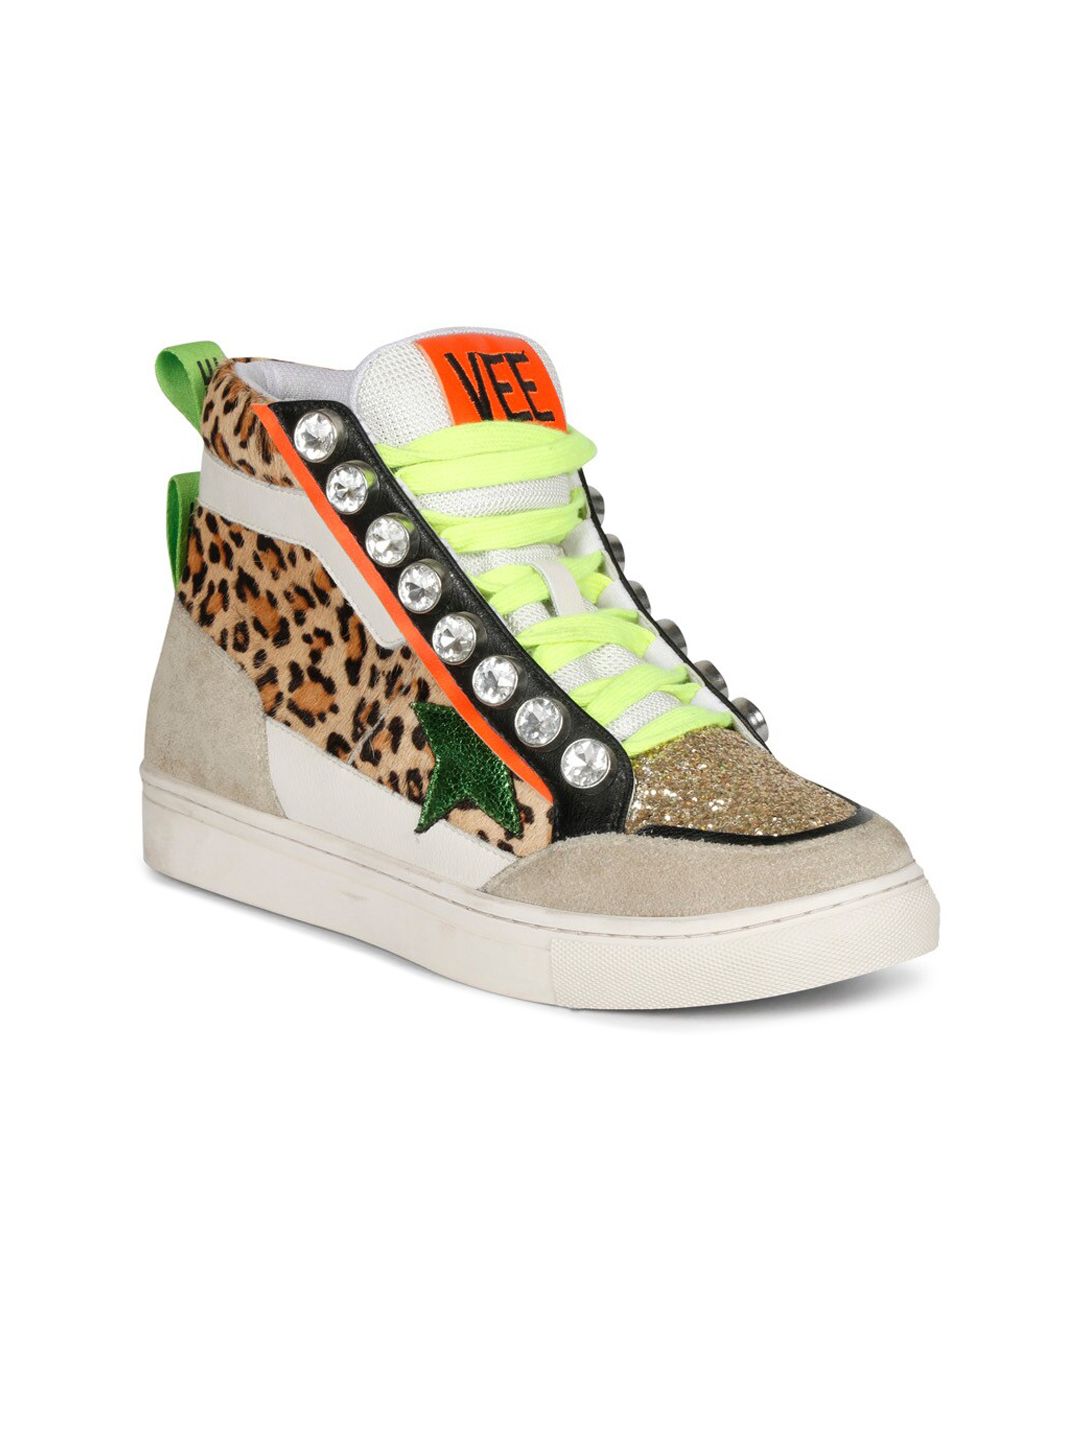 Saint G Women Printed Embellished Mid-Top Leather Sneakers Price in India